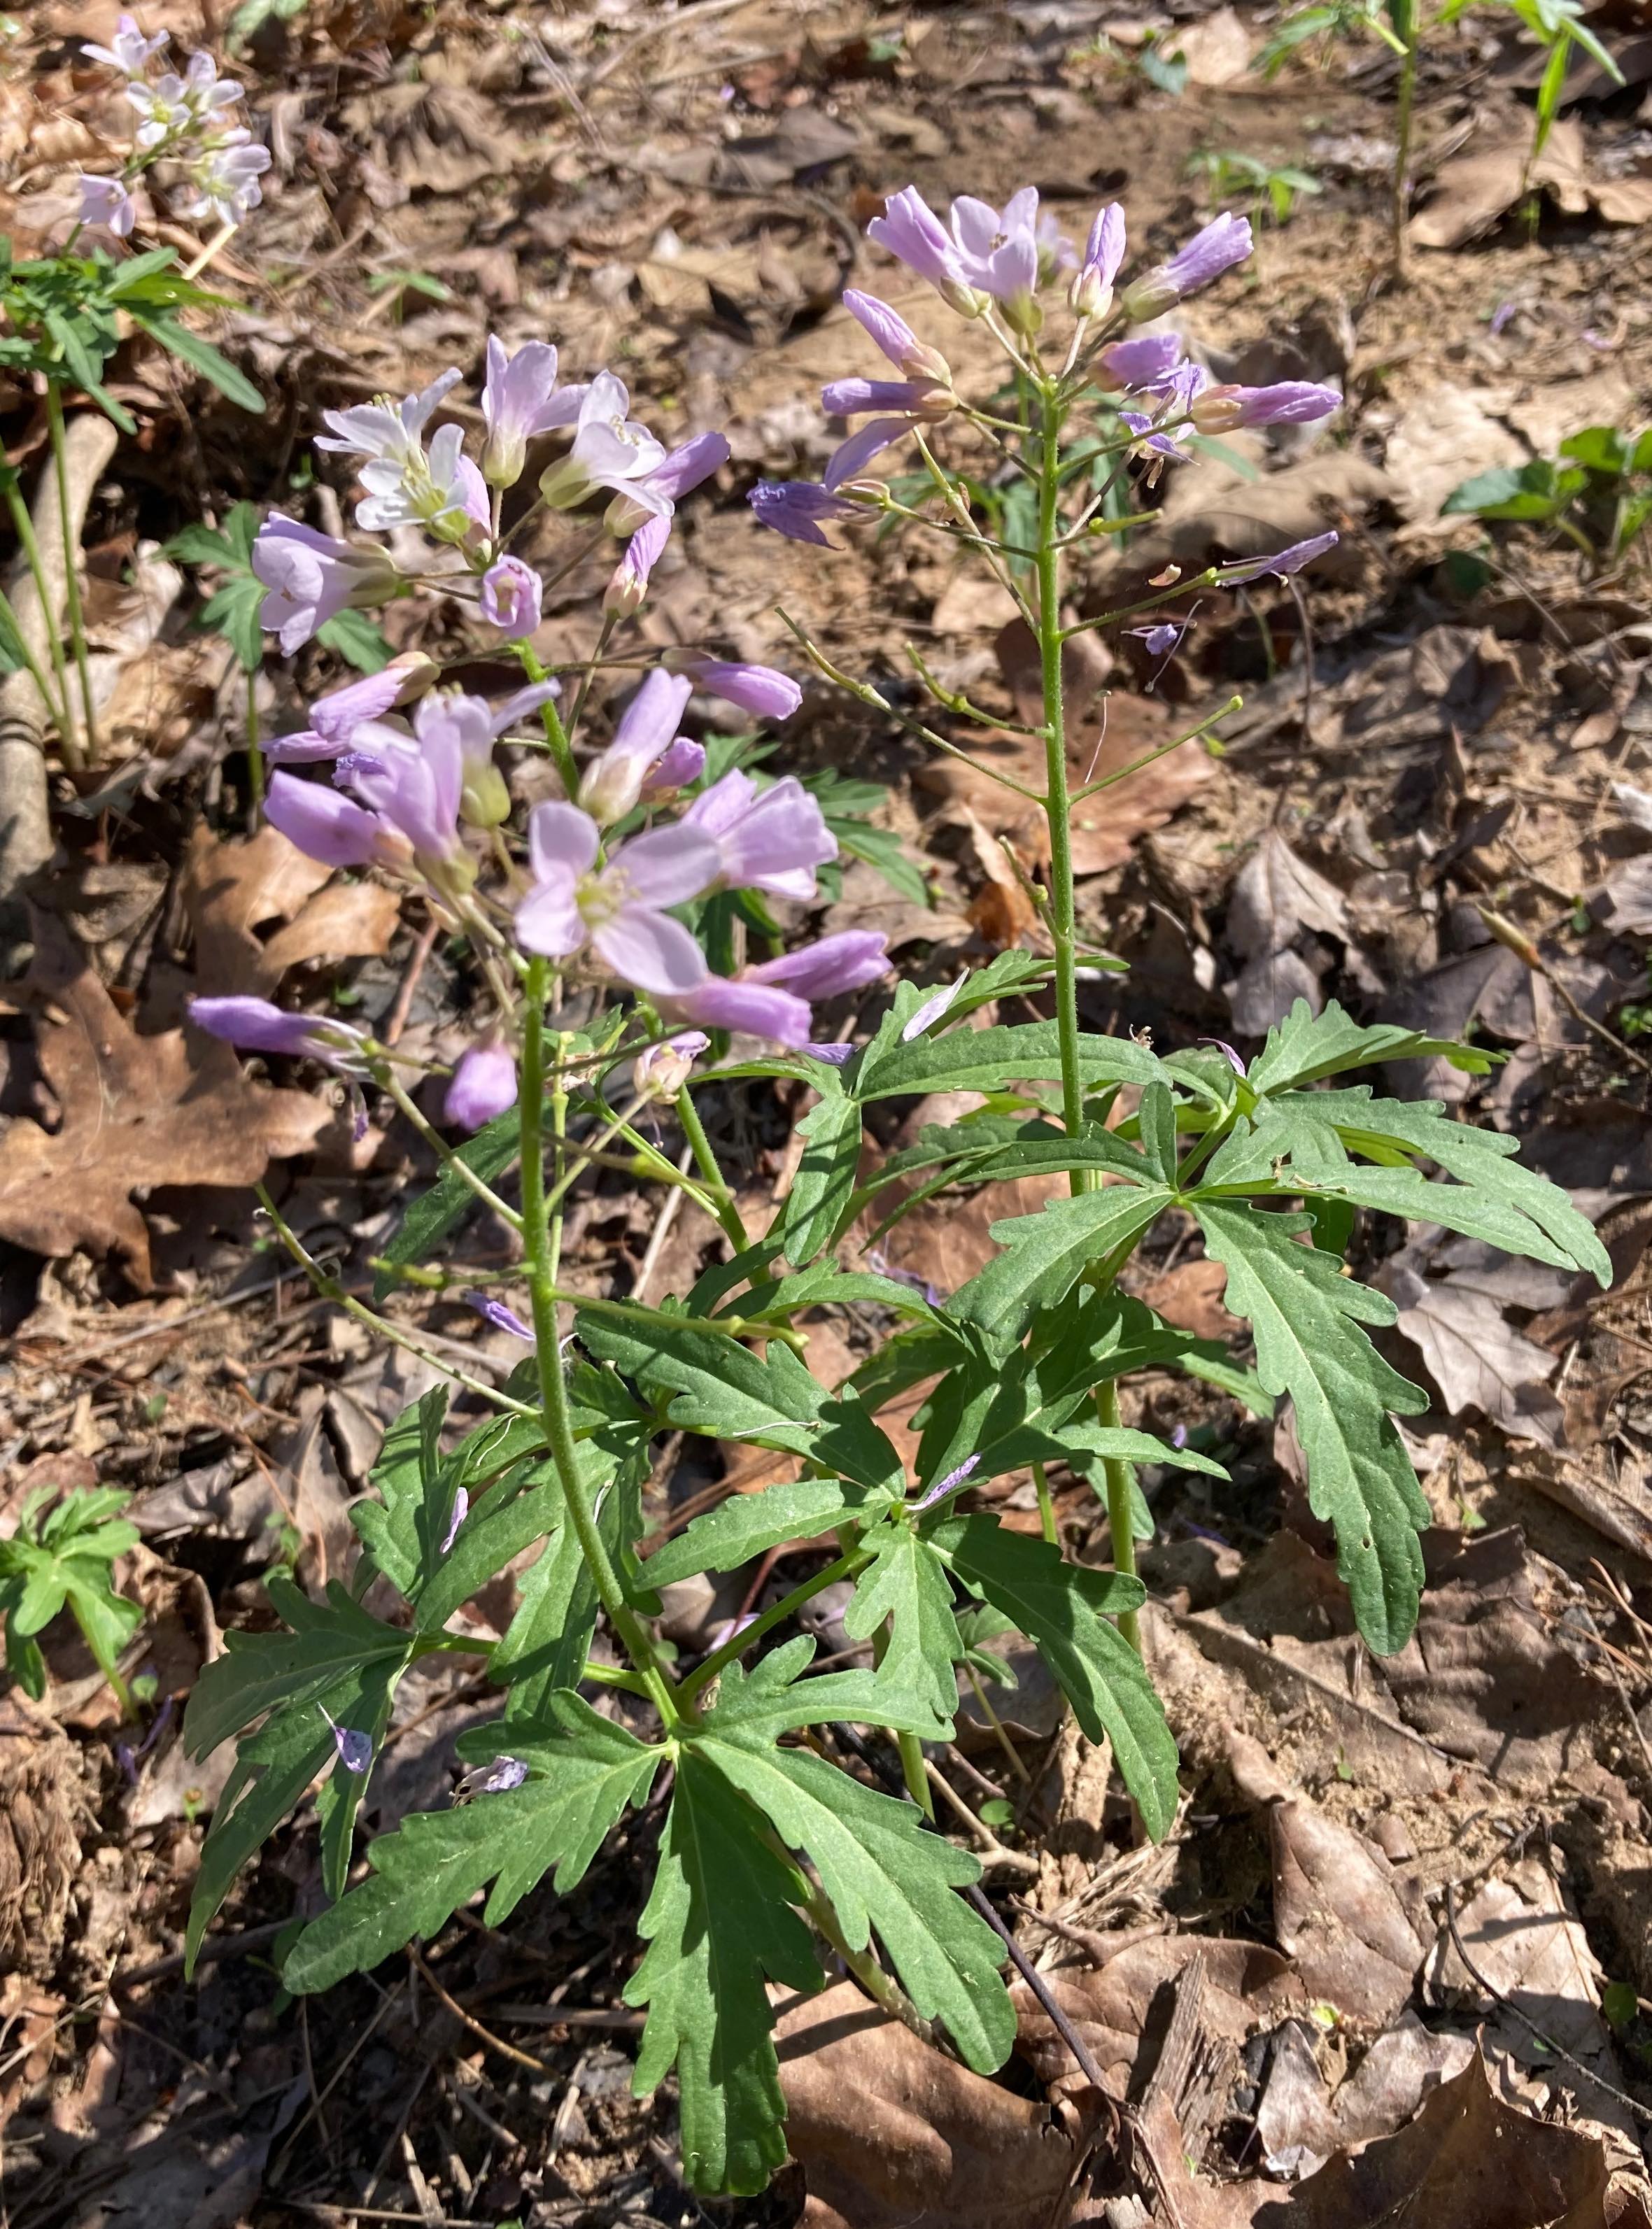 The Scientific Name is Cardamine concatenata [= Dentaria laciniata]. You will likely hear them called Cutleaf Toothwort. This picture shows the Although more commonly with white flowers, the color can also be lavender/pink/purplish. of Cardamine concatenata [= Dentaria laciniata]